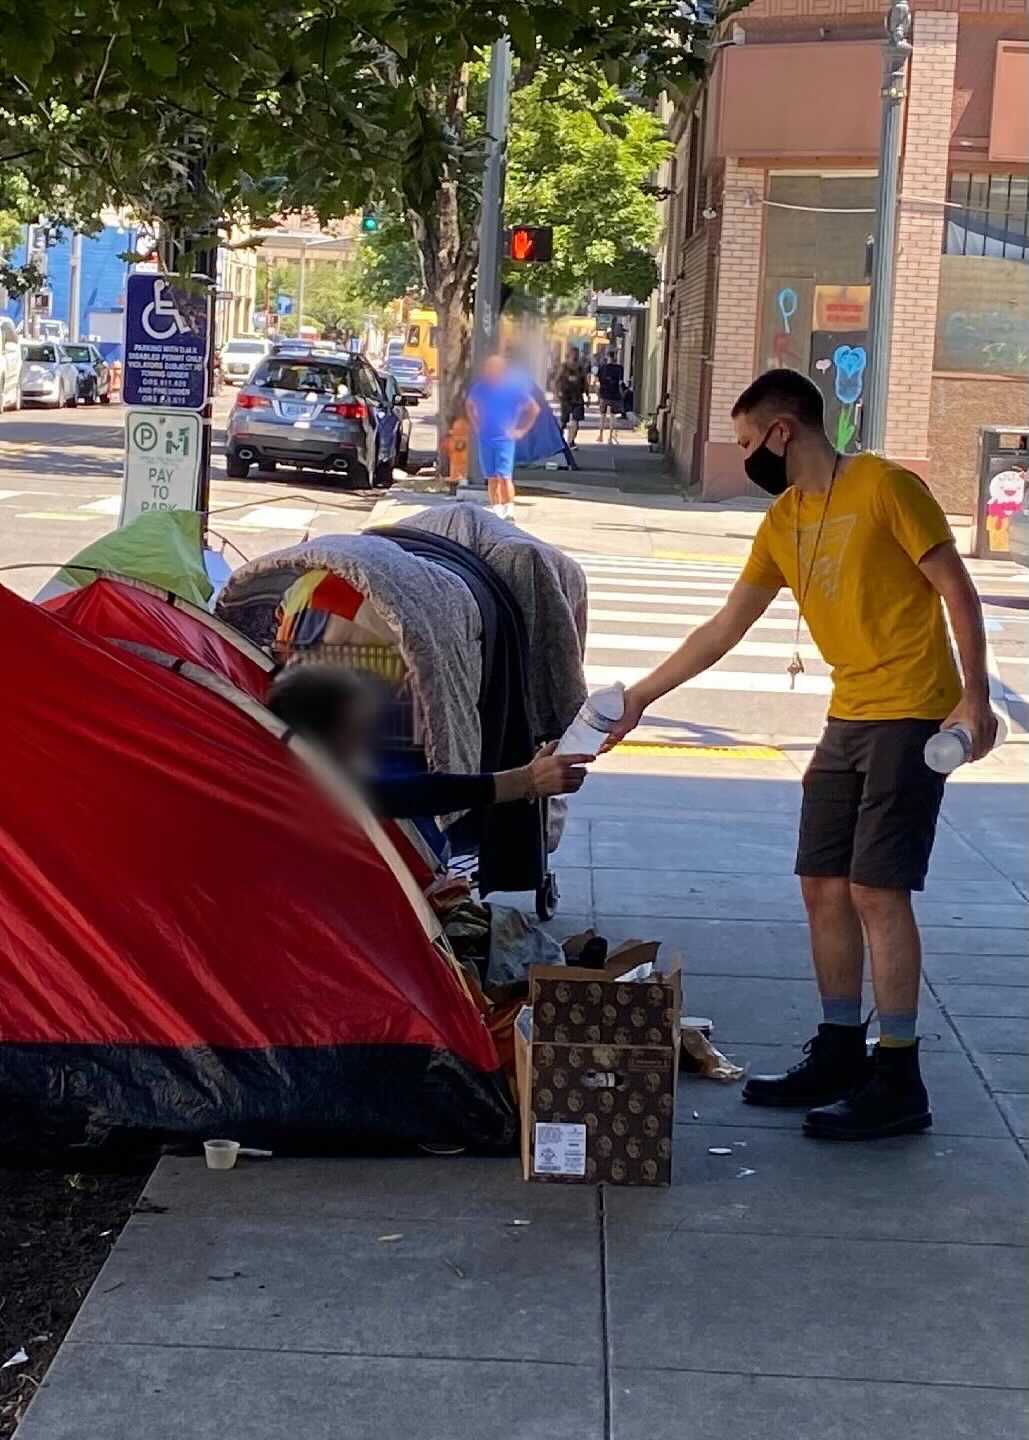 a person in a yellow shirt hands a bottle of frosty water to a person in a red tent on the streets of portland